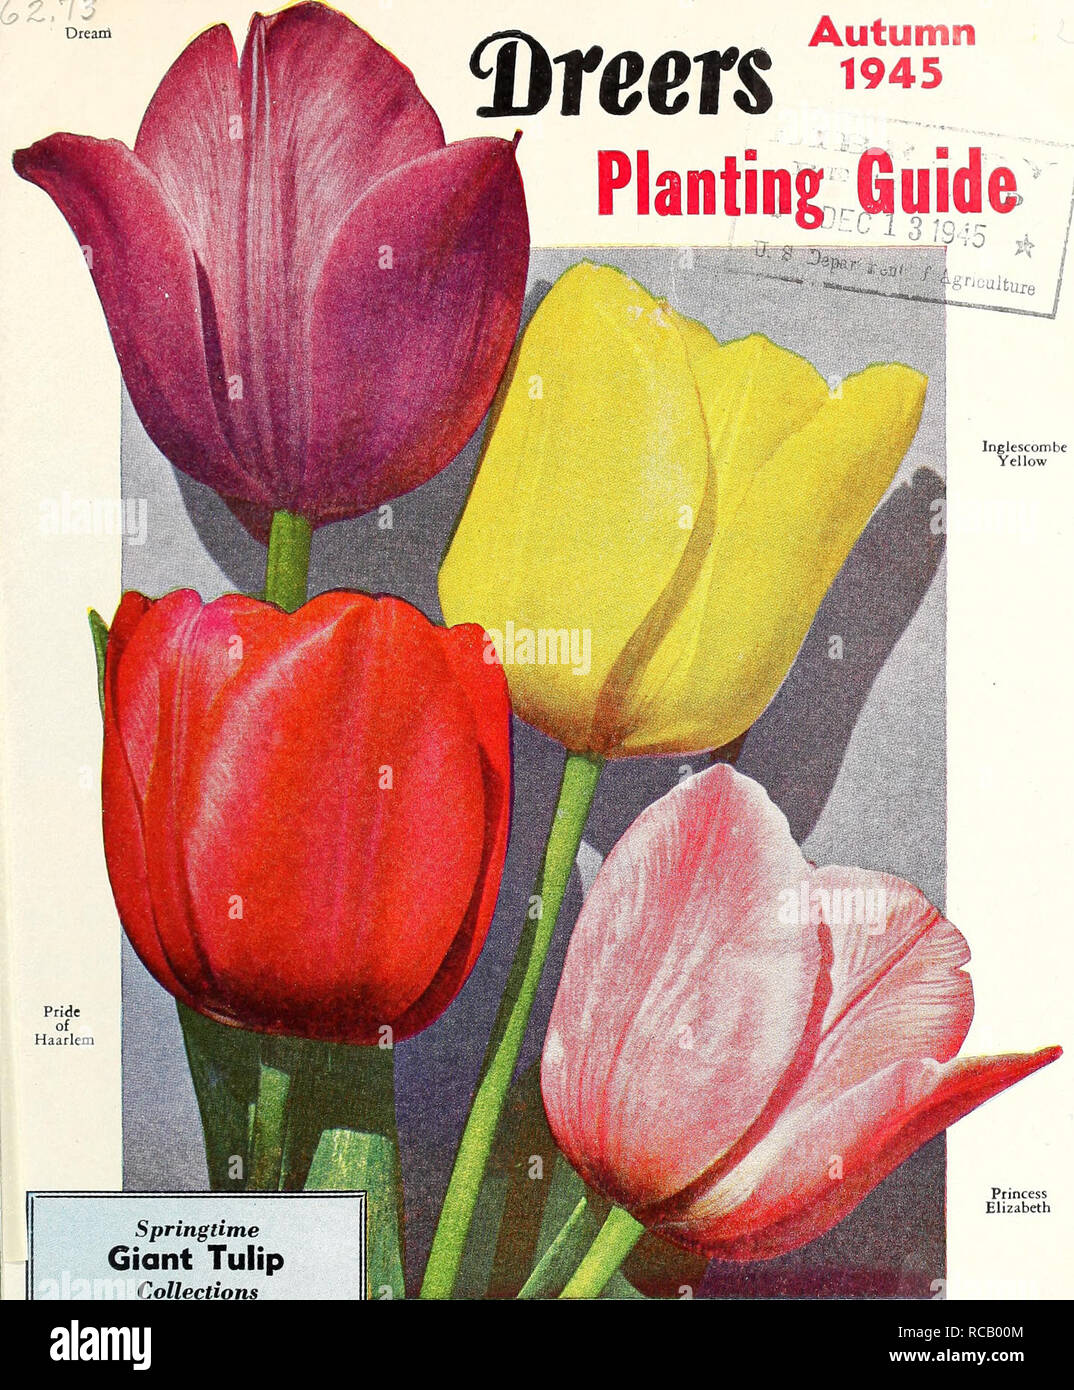 . Dreer's autumn 1945 planting guide. Bulbs (Plants) Catalogs; Flowers Seeds Catalogs; Gardening Equipment and supplies Catalogs; Nurseries (Horticulture) Catalogs; Vegetables Seeds Catalogs. Autumn 1945 1. Springtime Giant Tulip Collections These contain the four mag- nificent Giant Tulips shown in color on this page. 42-140 24 Bulbs, 6 of each kind, value $3.00, post- o TC paid for $2.75 42-14? 48 Bulbs, 12 of each kind, value $6.00, ^     postpaid for $5.25 42-742 TOO Bulbs, 25 of each kind, value $11.00, ^     postpaid for $T./5 Princess Elizabeth Four Magnificent Giant Tulips 4J-726 Dream Stock Photo